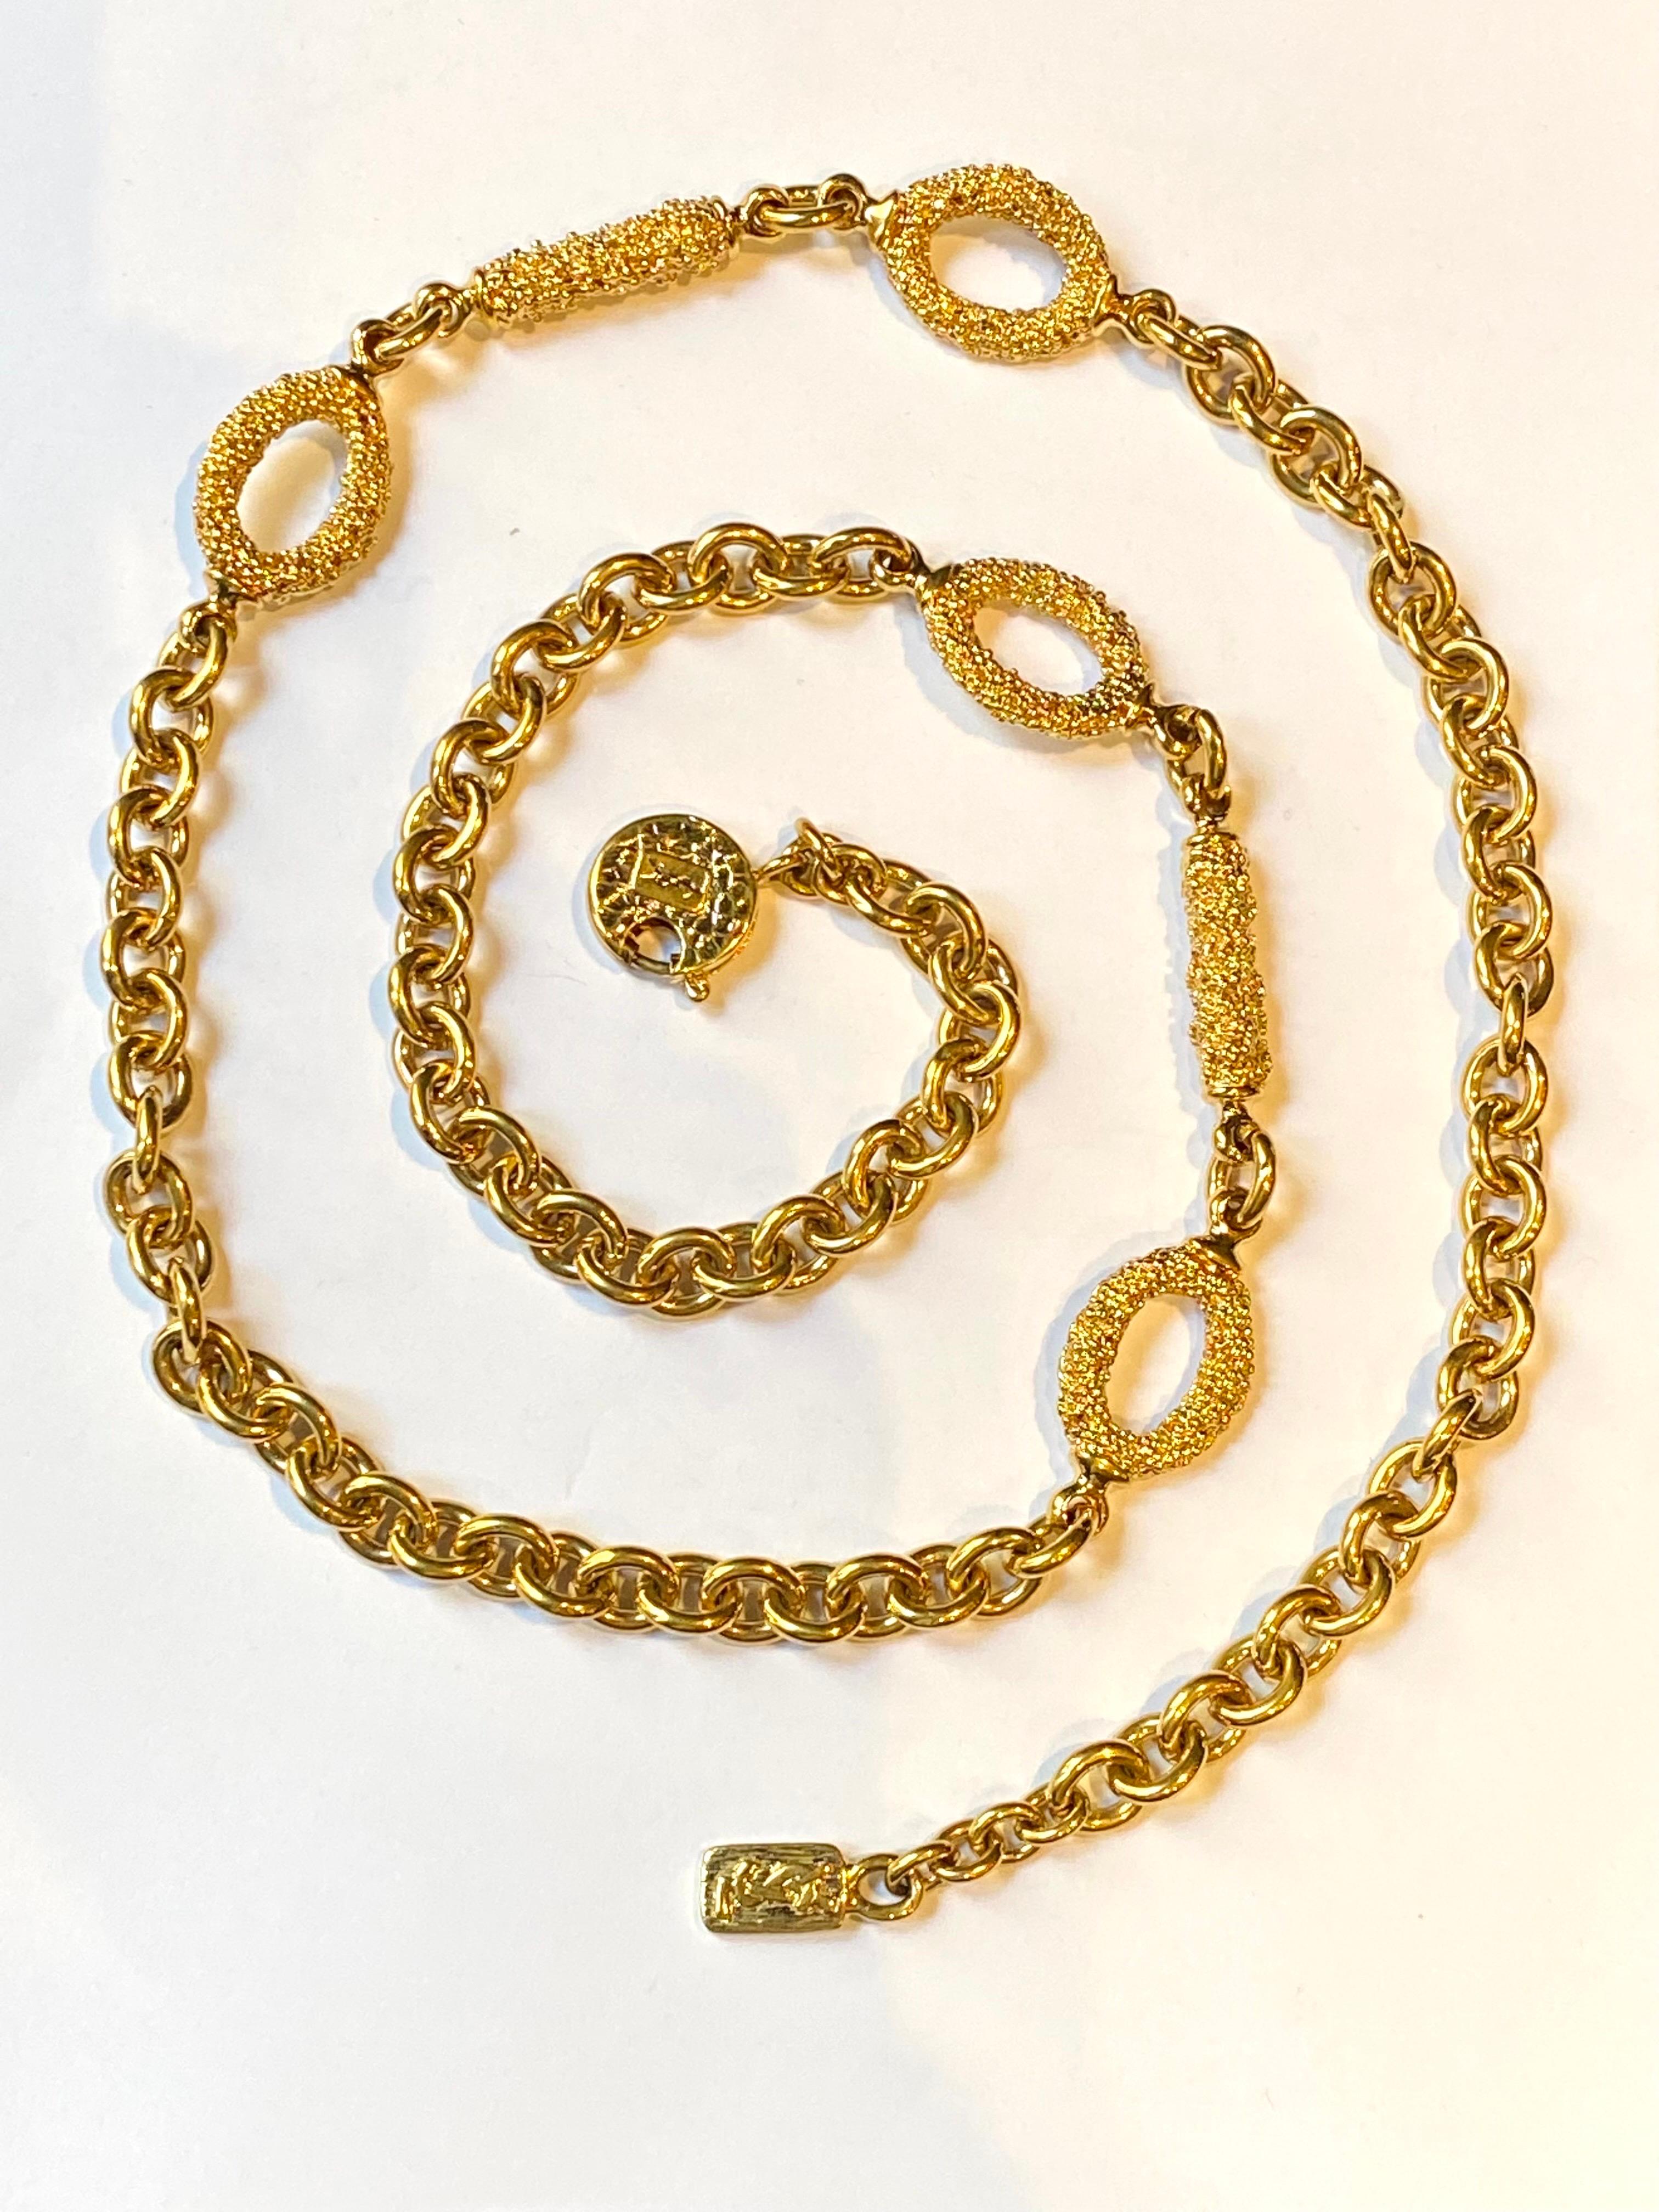 Presented is an elegant 1980s Yves Saint Laurent 35 inch long necklace in 18K gold plate. The classic cable link chain of lightly oval round links is accented with two sets of ornamental links. Each set is comprised of two oval rings flanking a